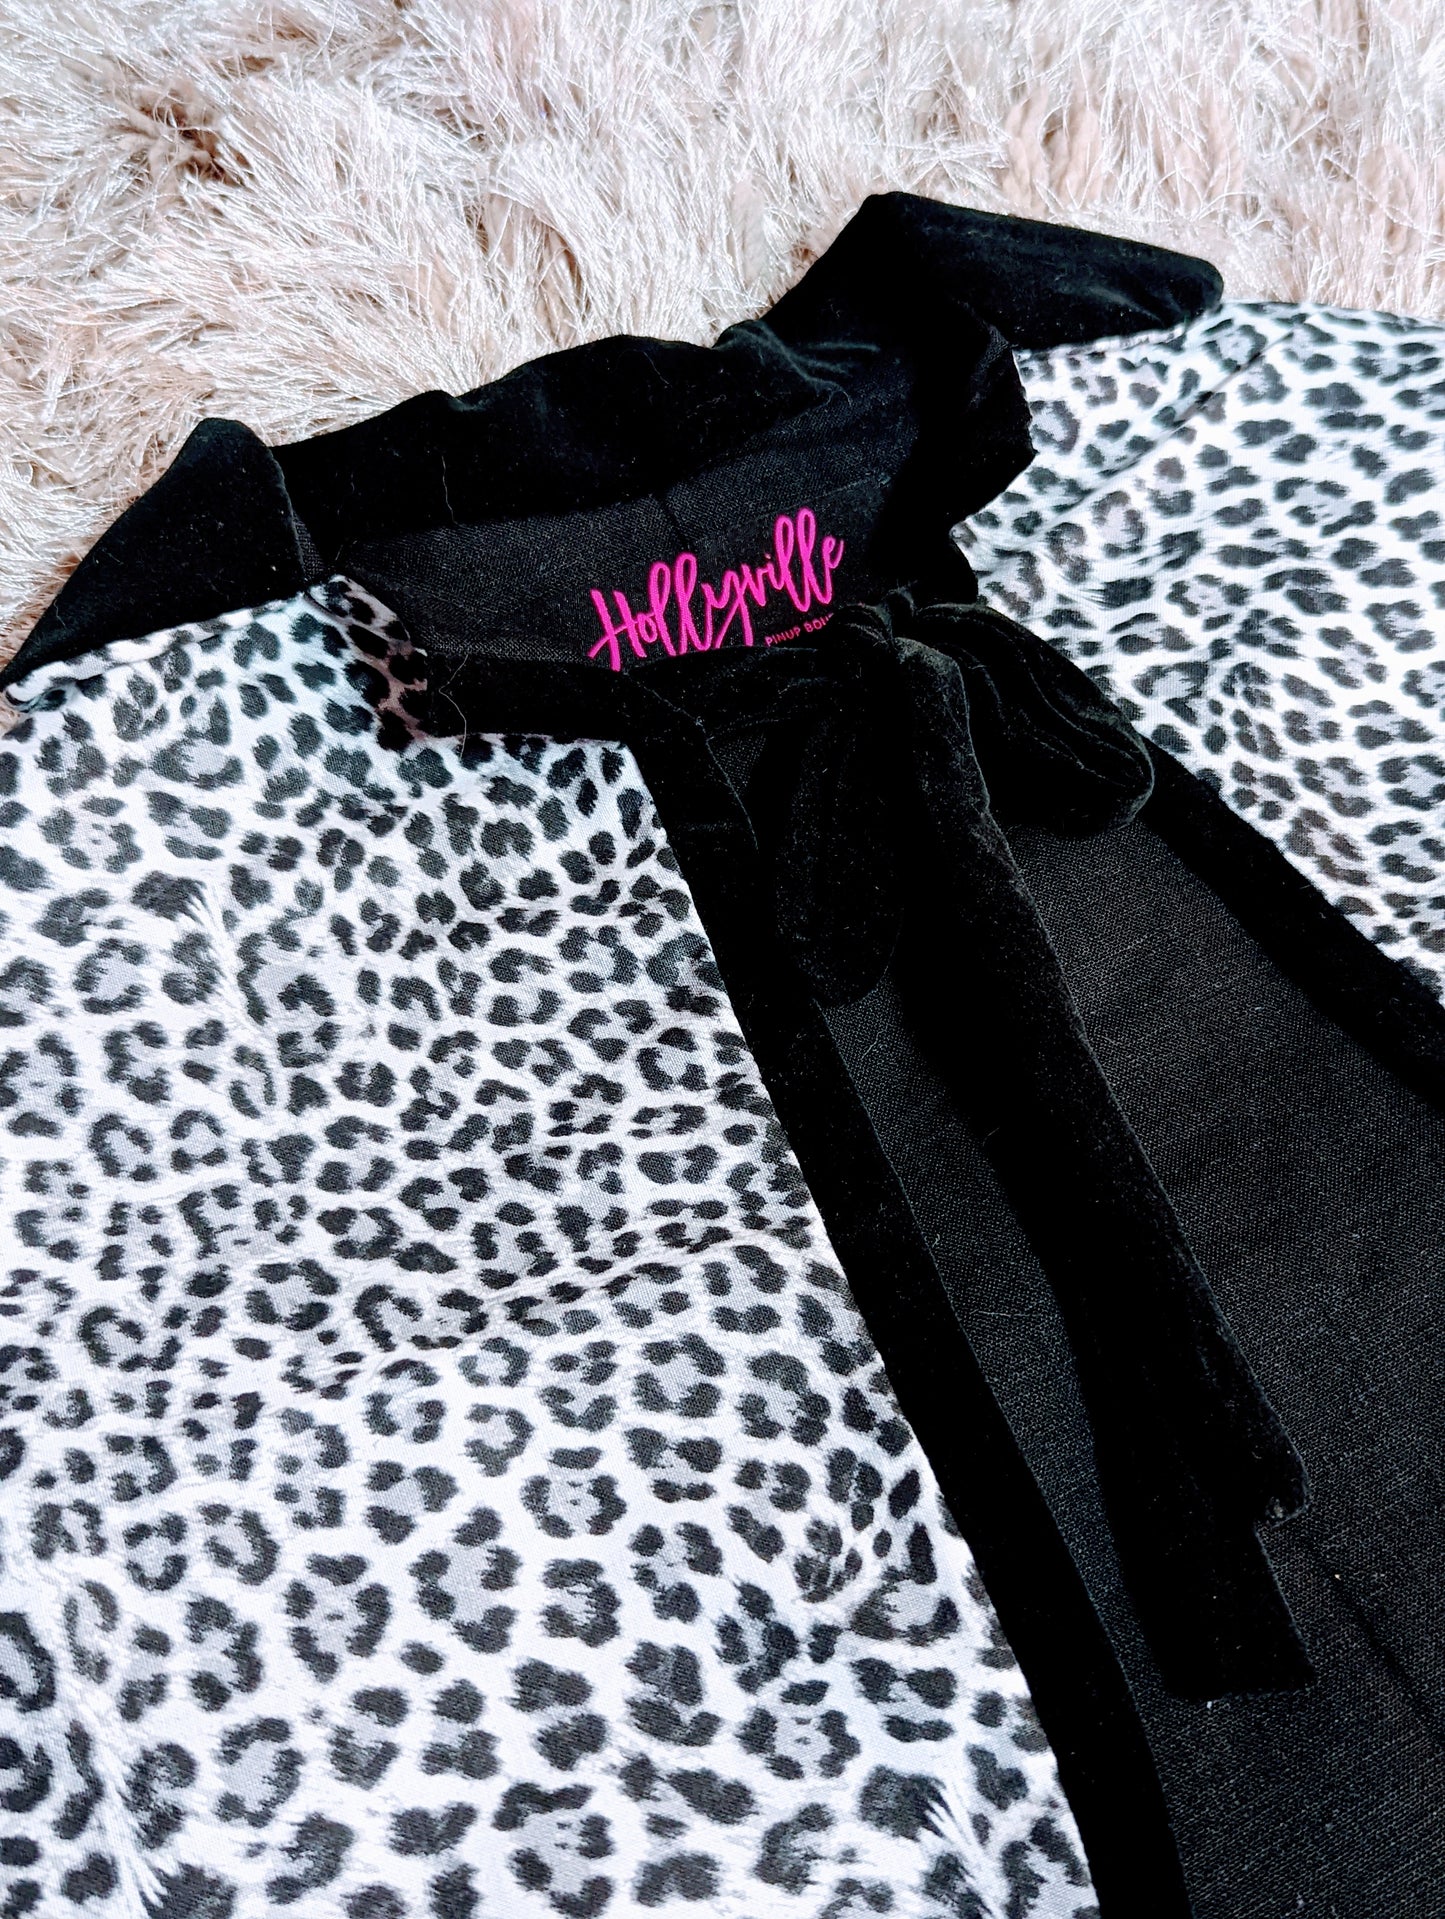 Snow Leopard Print Capelet by Hollyville